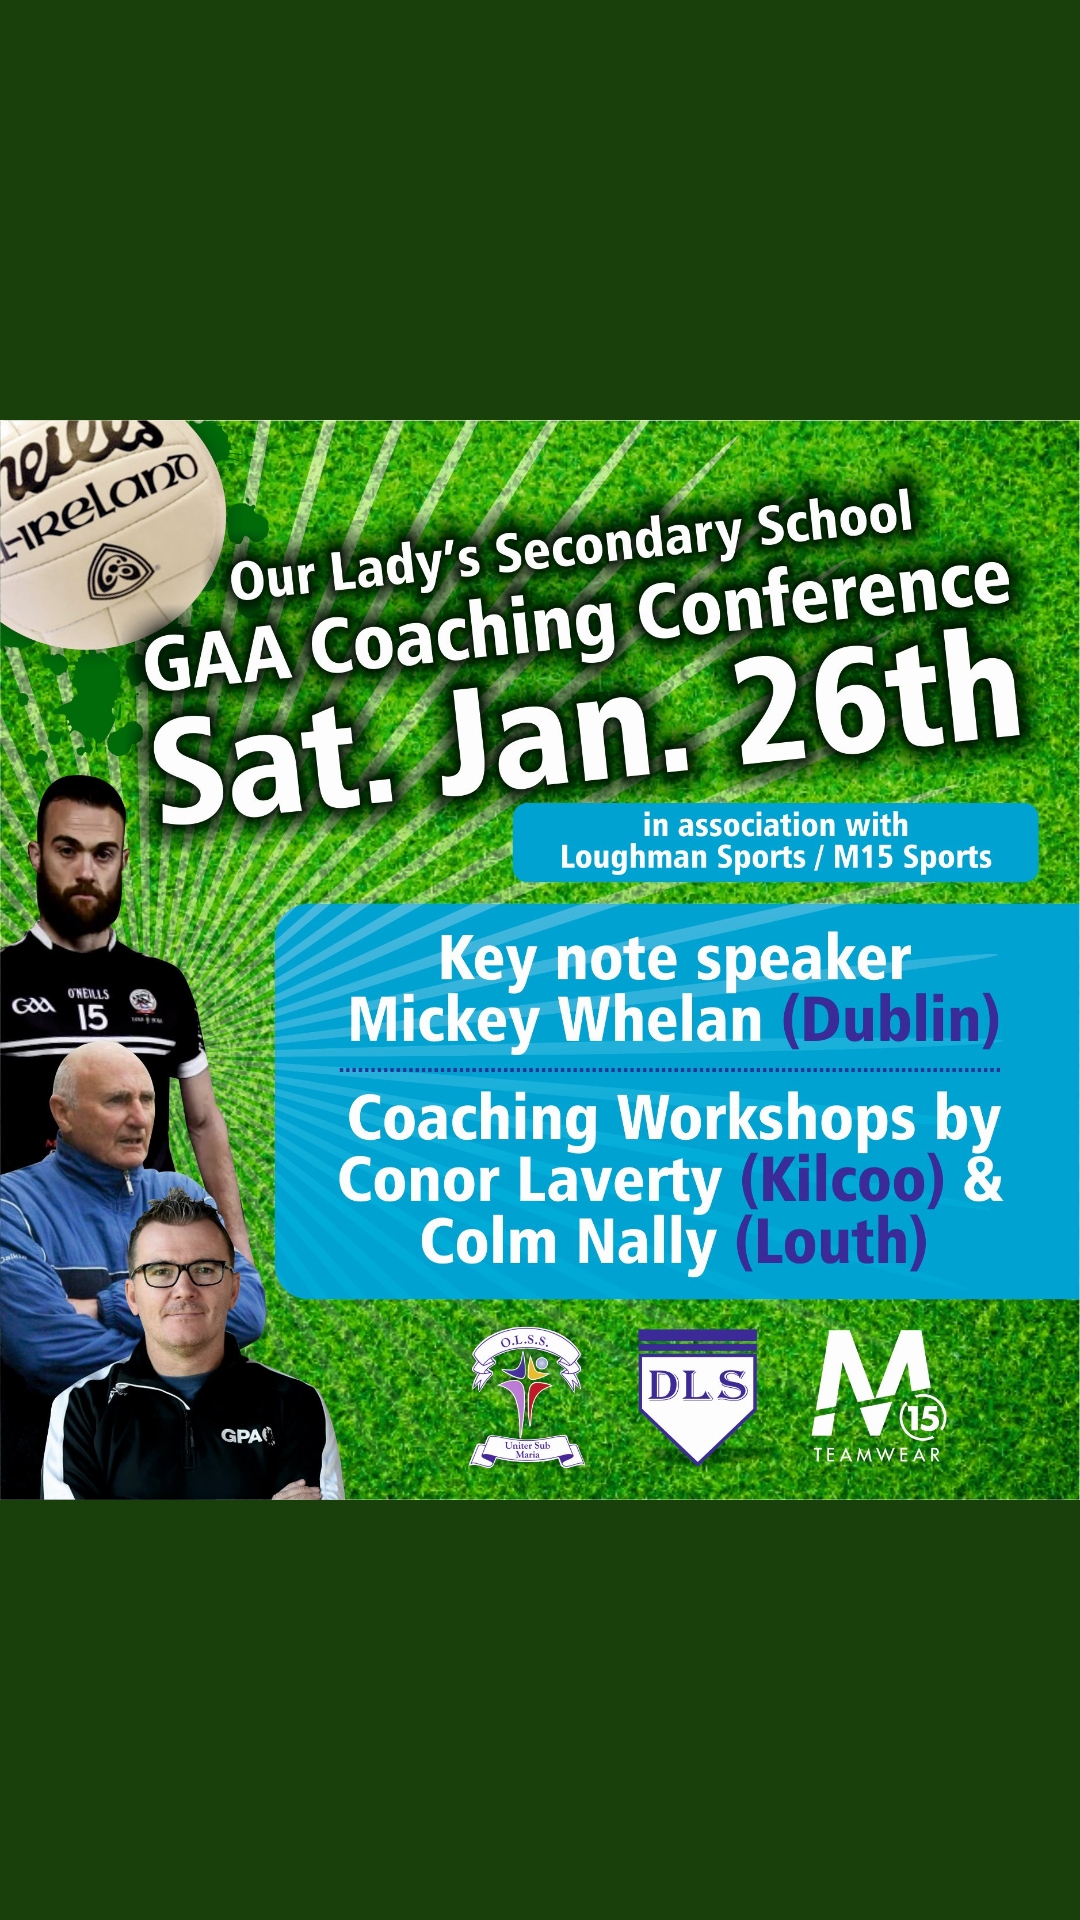 Our Lady’s Secondary School, Castleblayney, Co. Monaghan are hosting a GAA Coaching Conference this Saturday, the 26th of January.